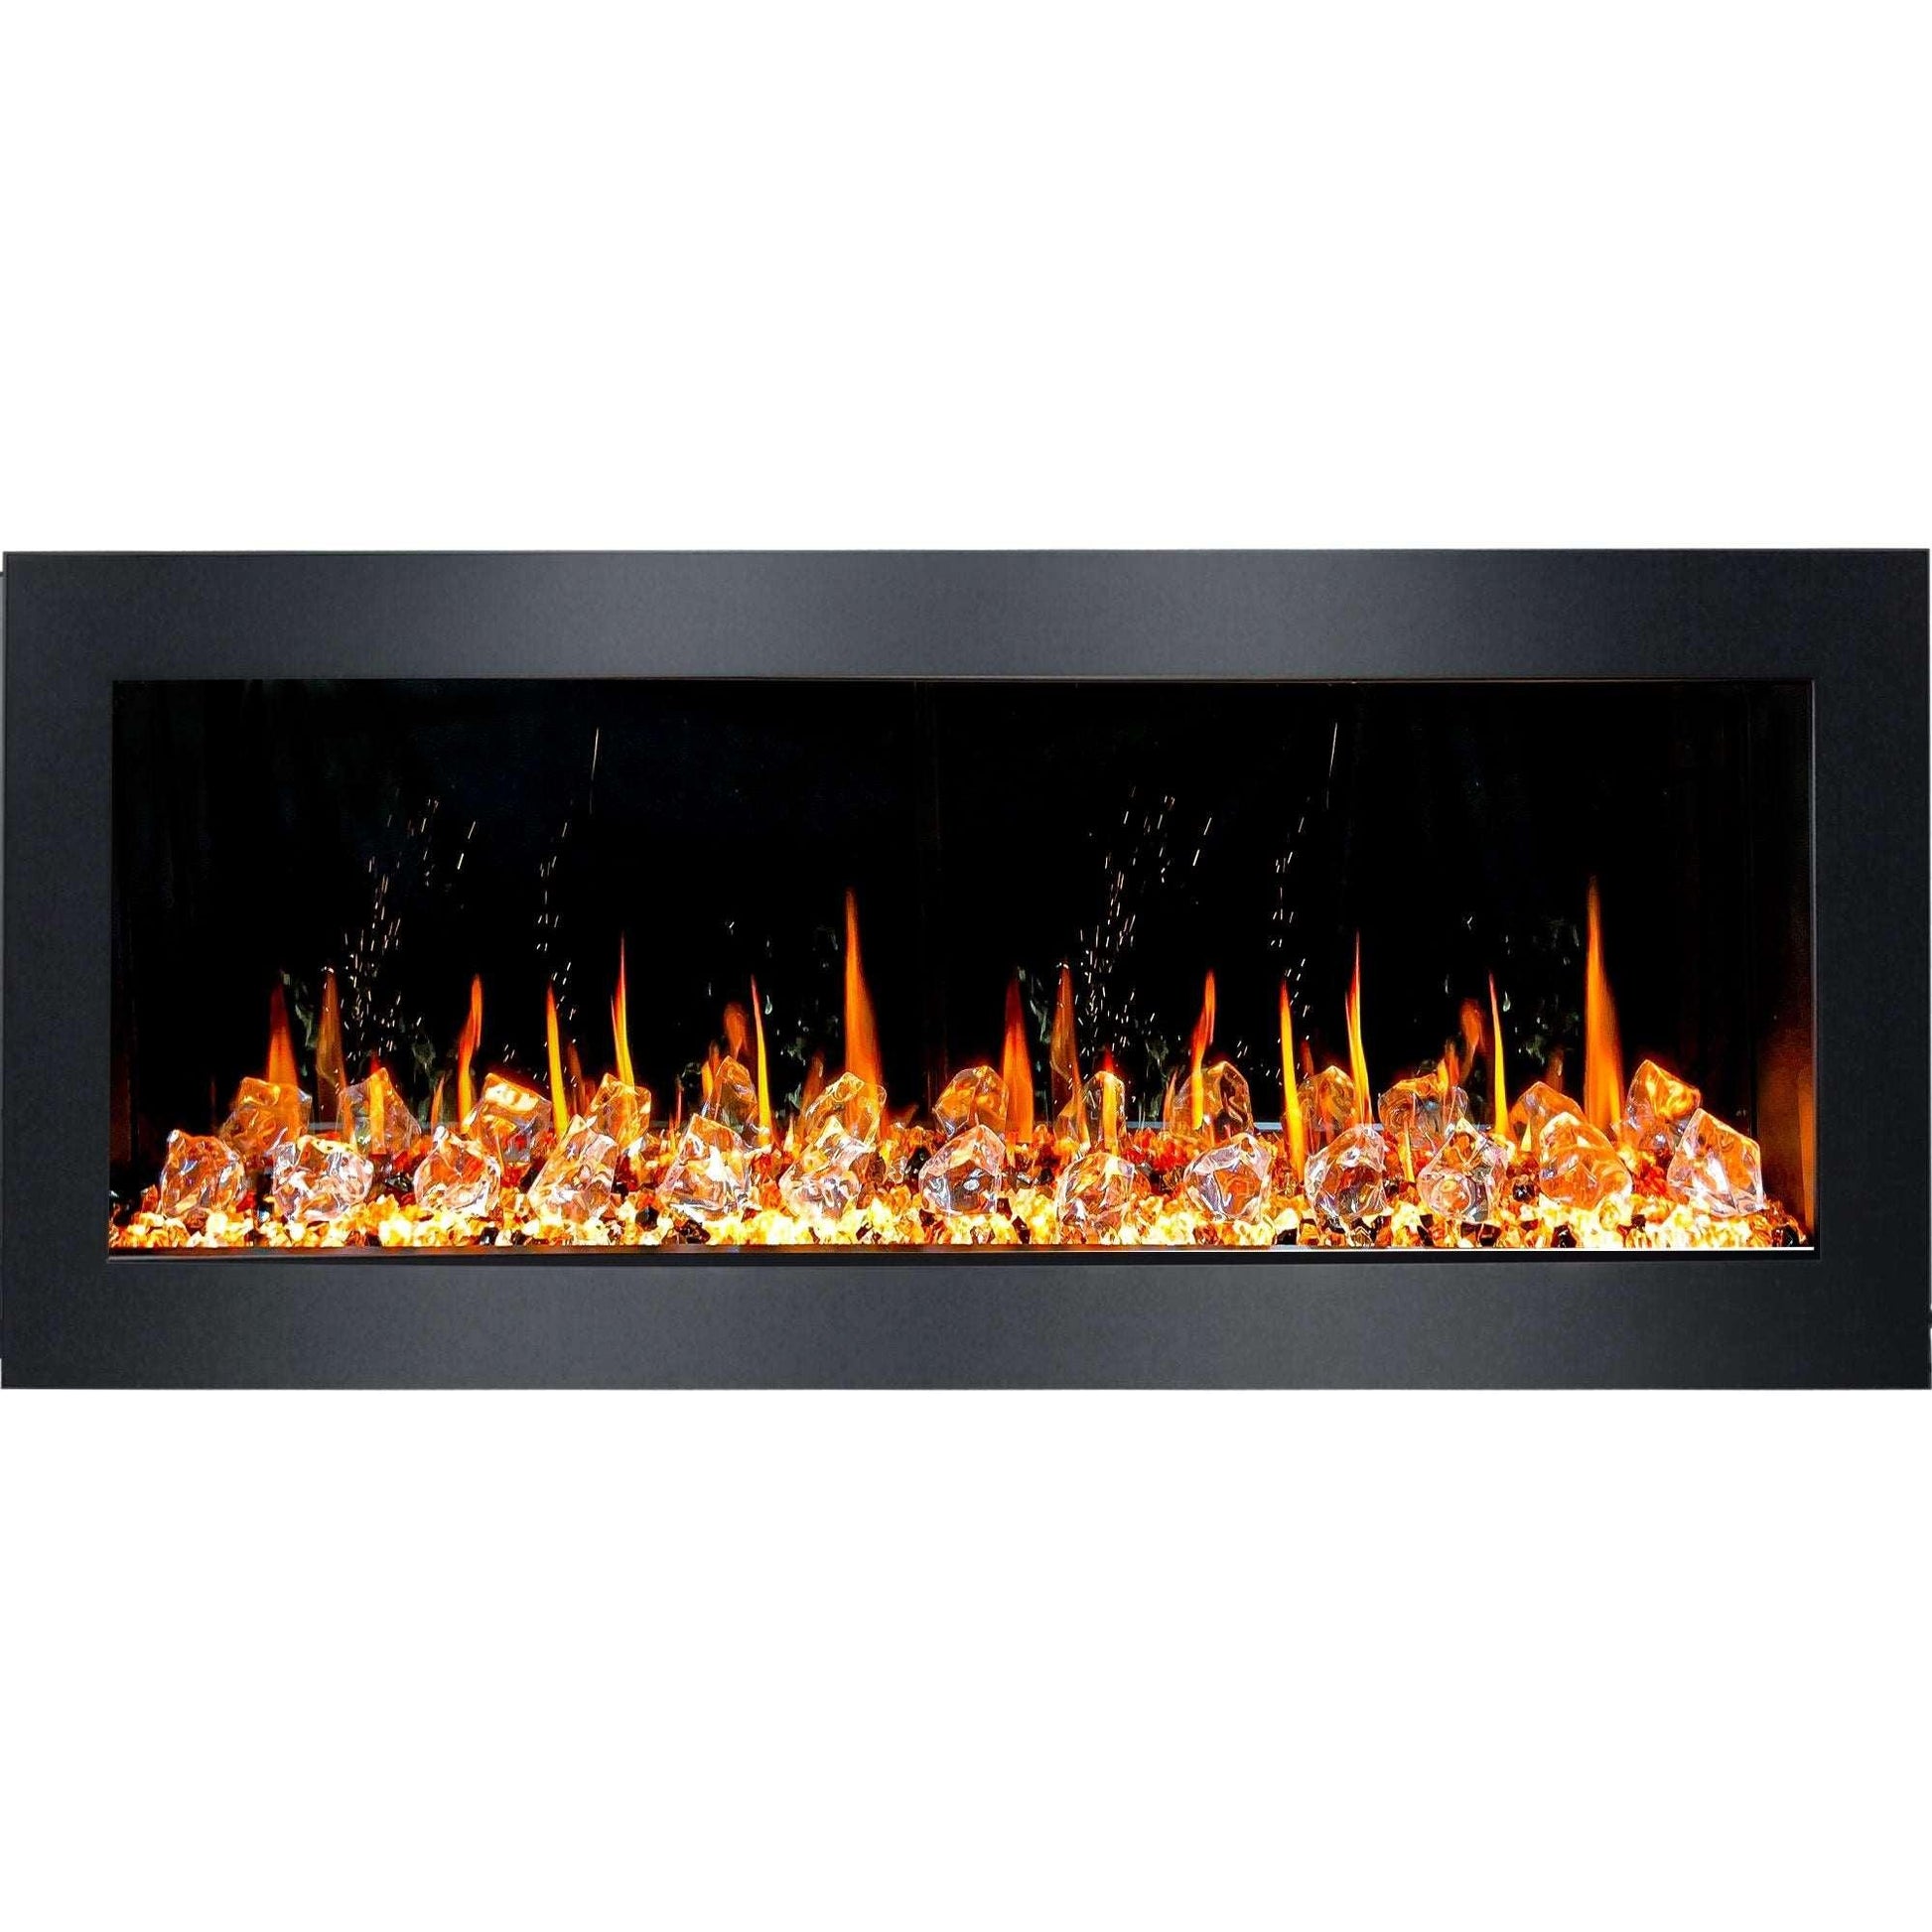 ZopaFlame™ 48" Linear Wall-mount Electric Fireplace - BC19488V - ZopaFlame Fireplaces